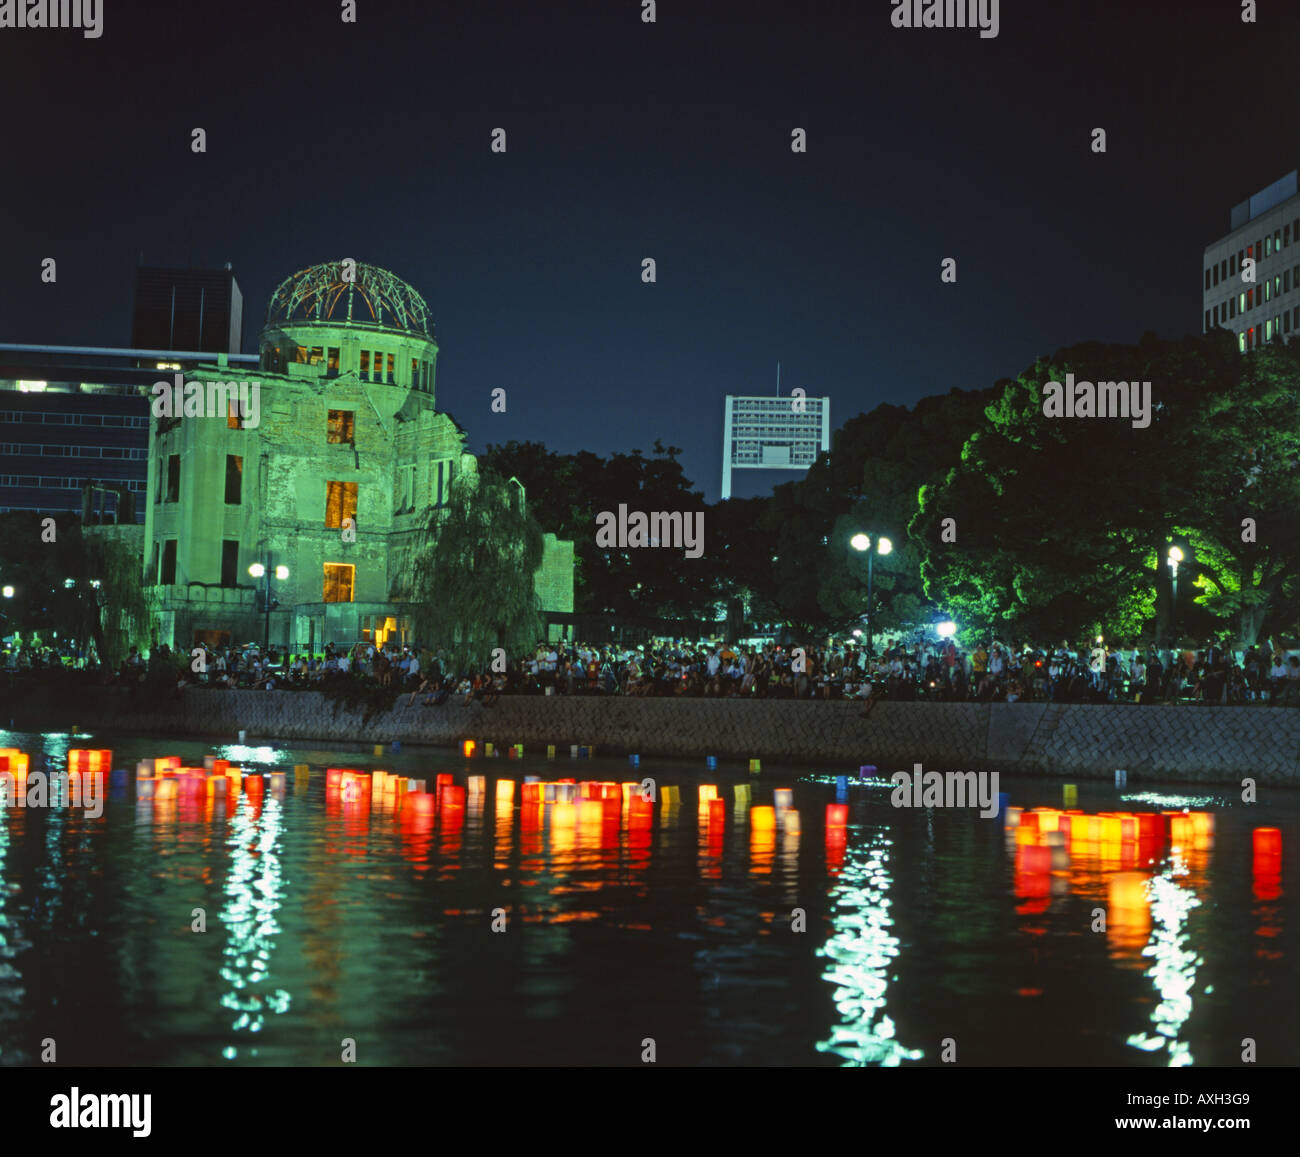 Floating lanterns on August 6th, Hiroshima, Japan. Placed in the river beside the A-Bomb Dome ( a UNESCO World Heritage Site. ) Stock Photo